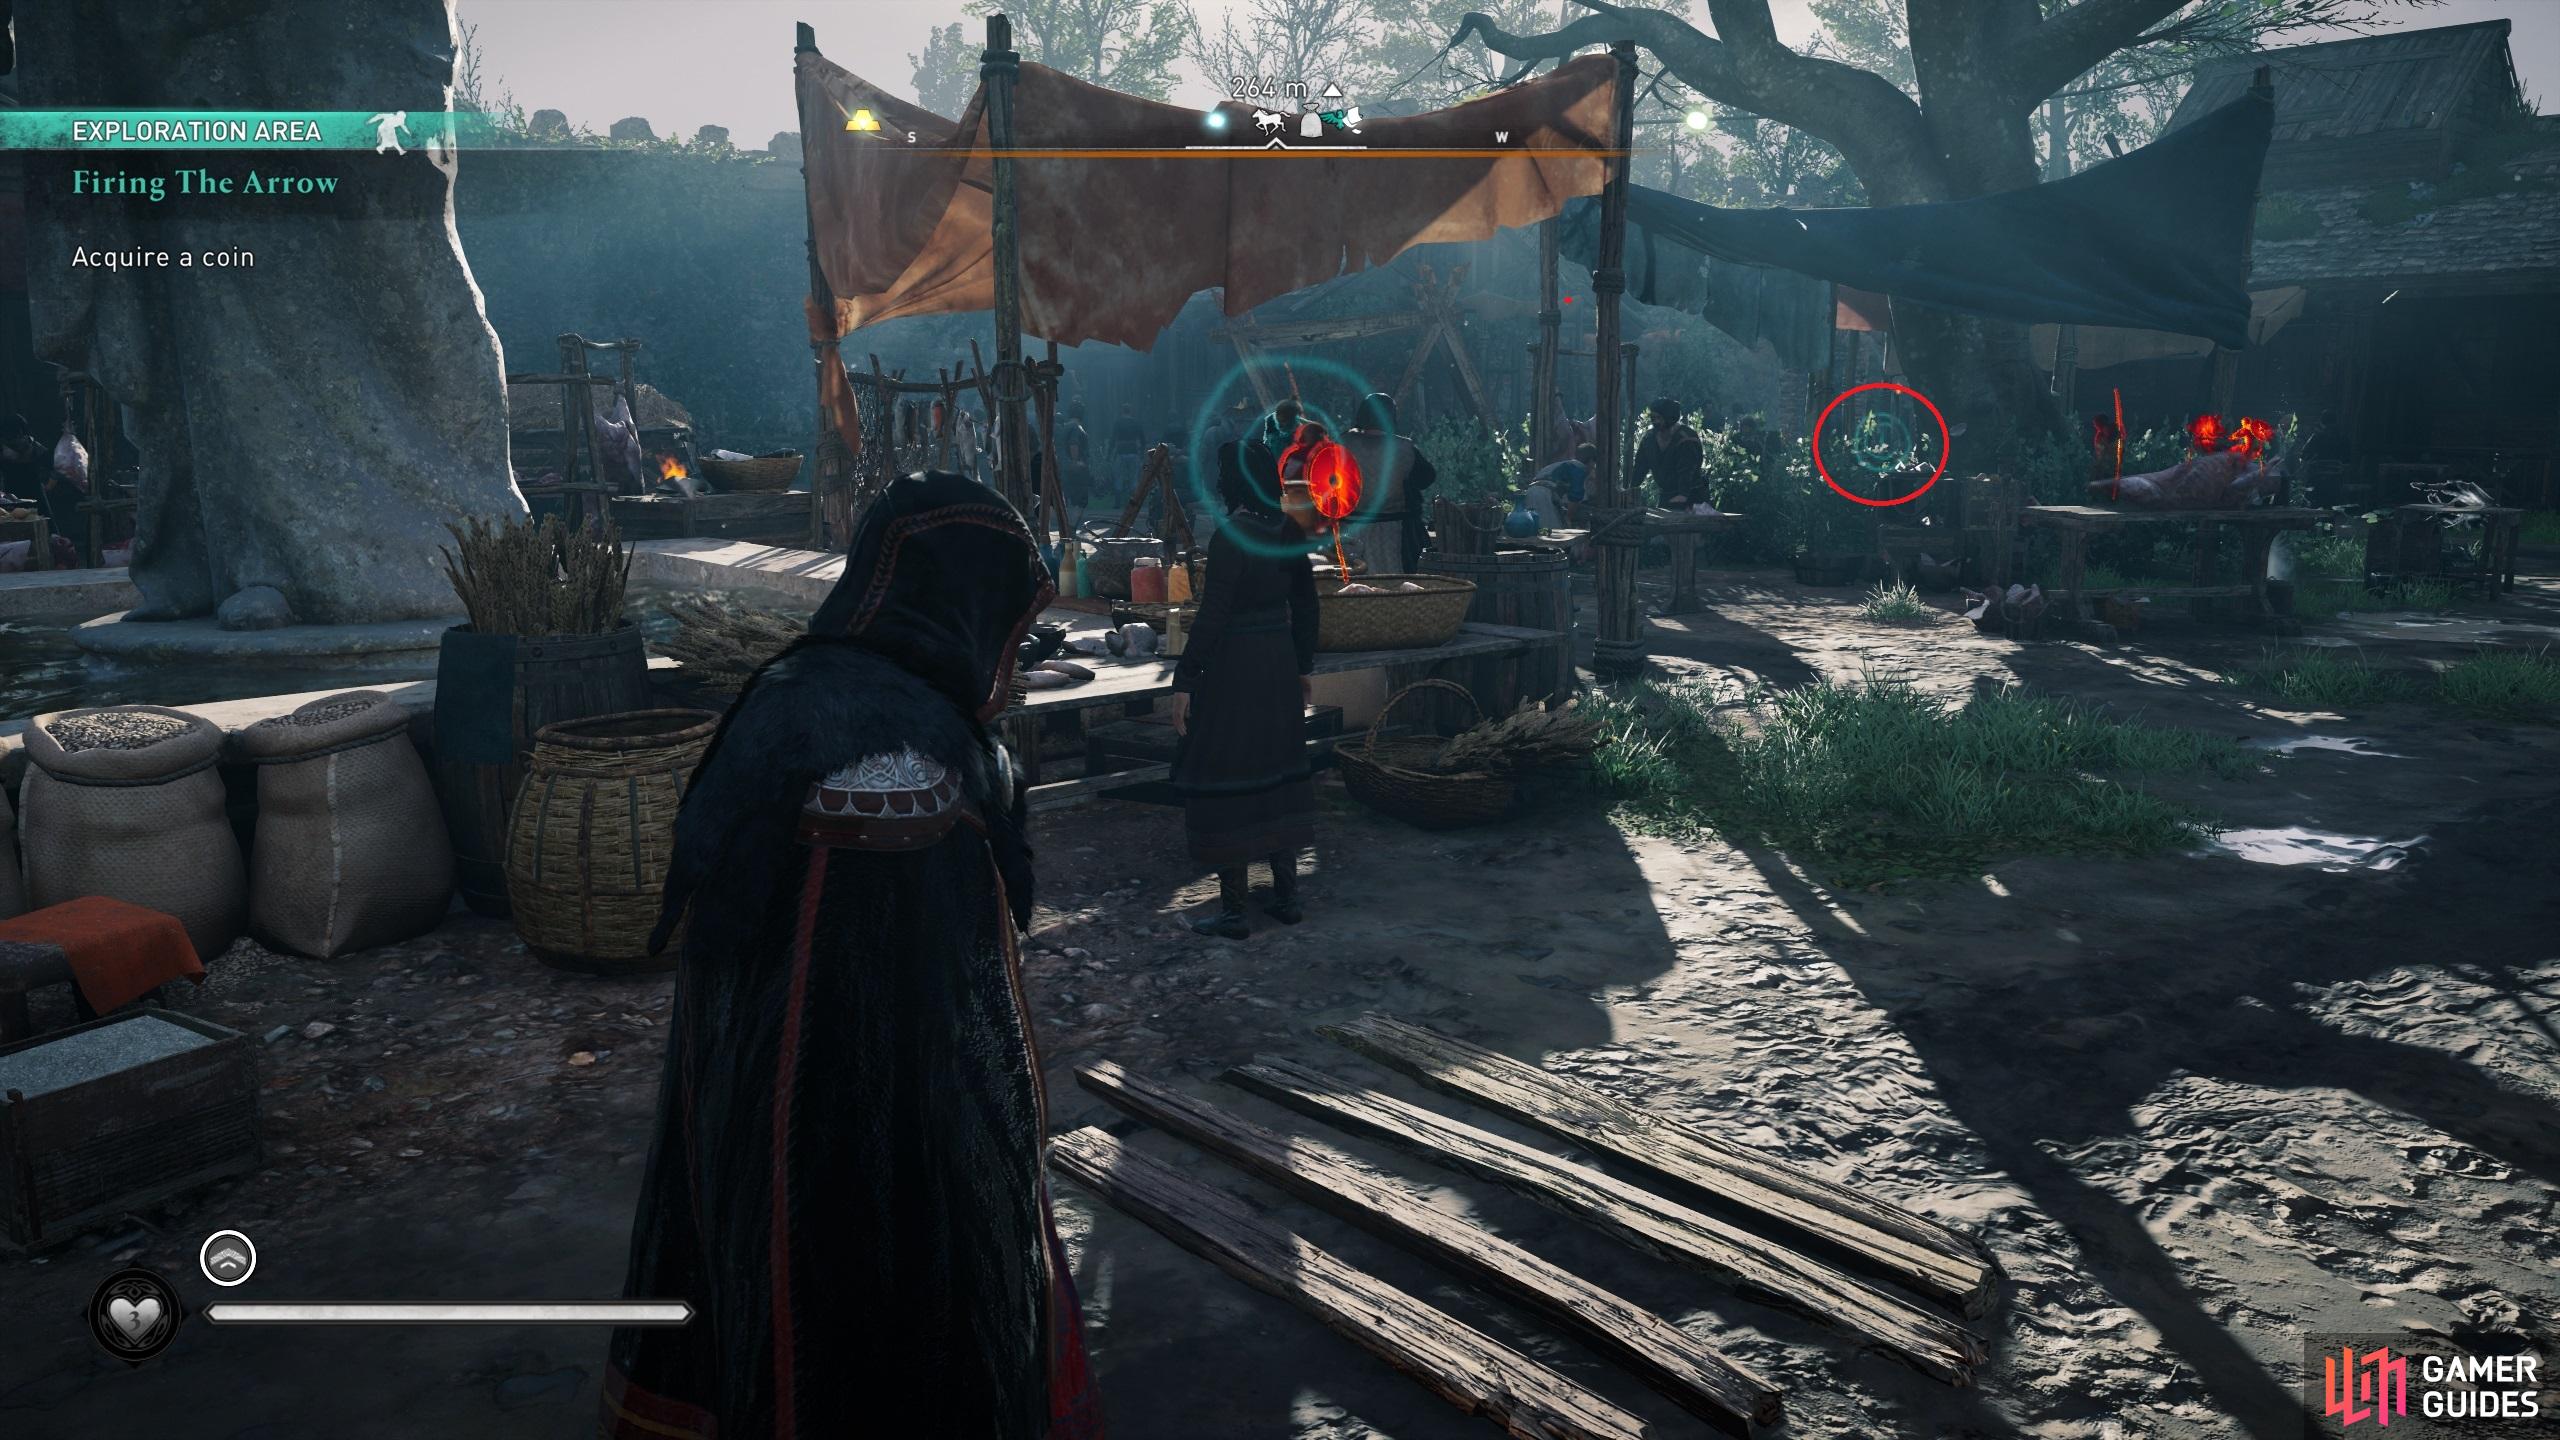 You'll find the Norse Man in the western section of the market, marked here by a red circle.